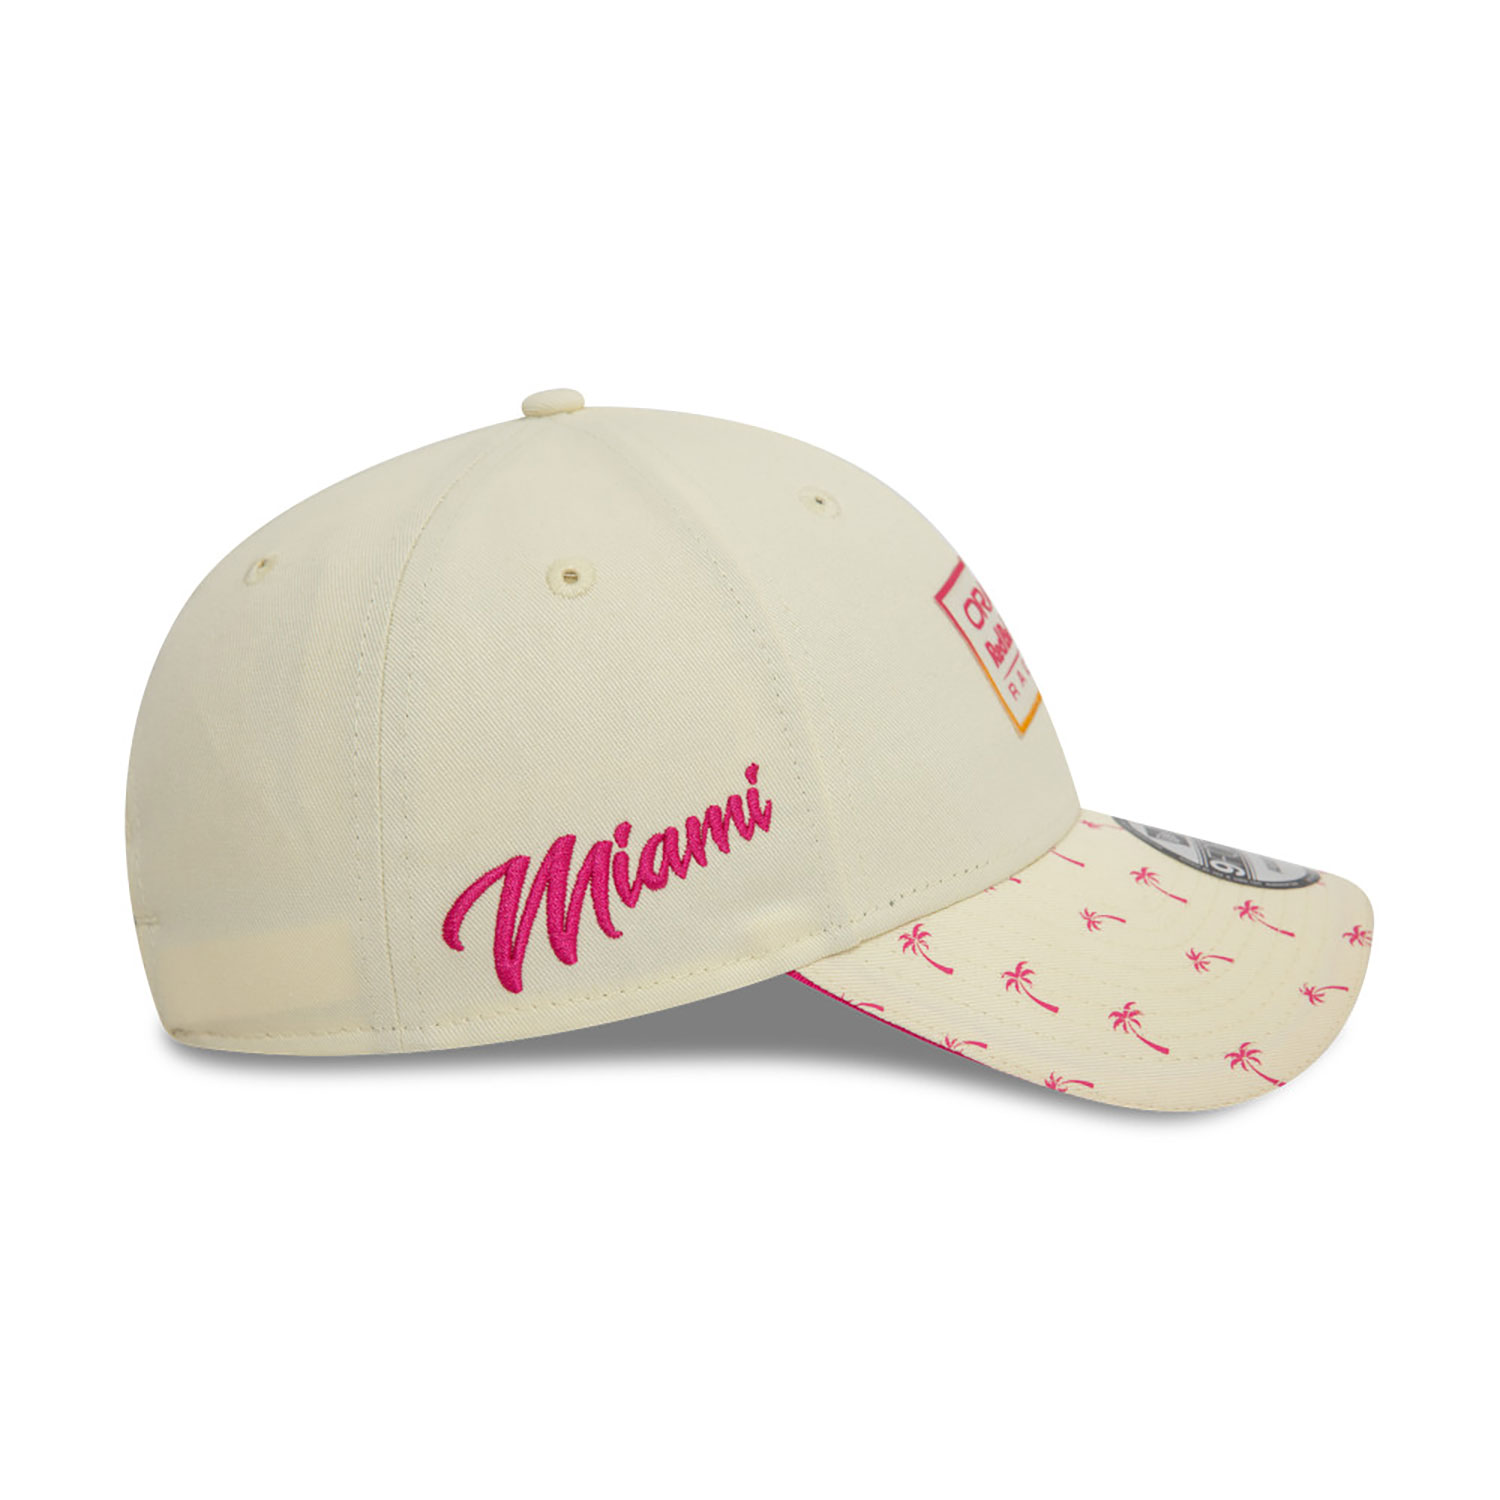 Red Bull Racing Miami Race Special Off White 9FORTY Adjustable Cap